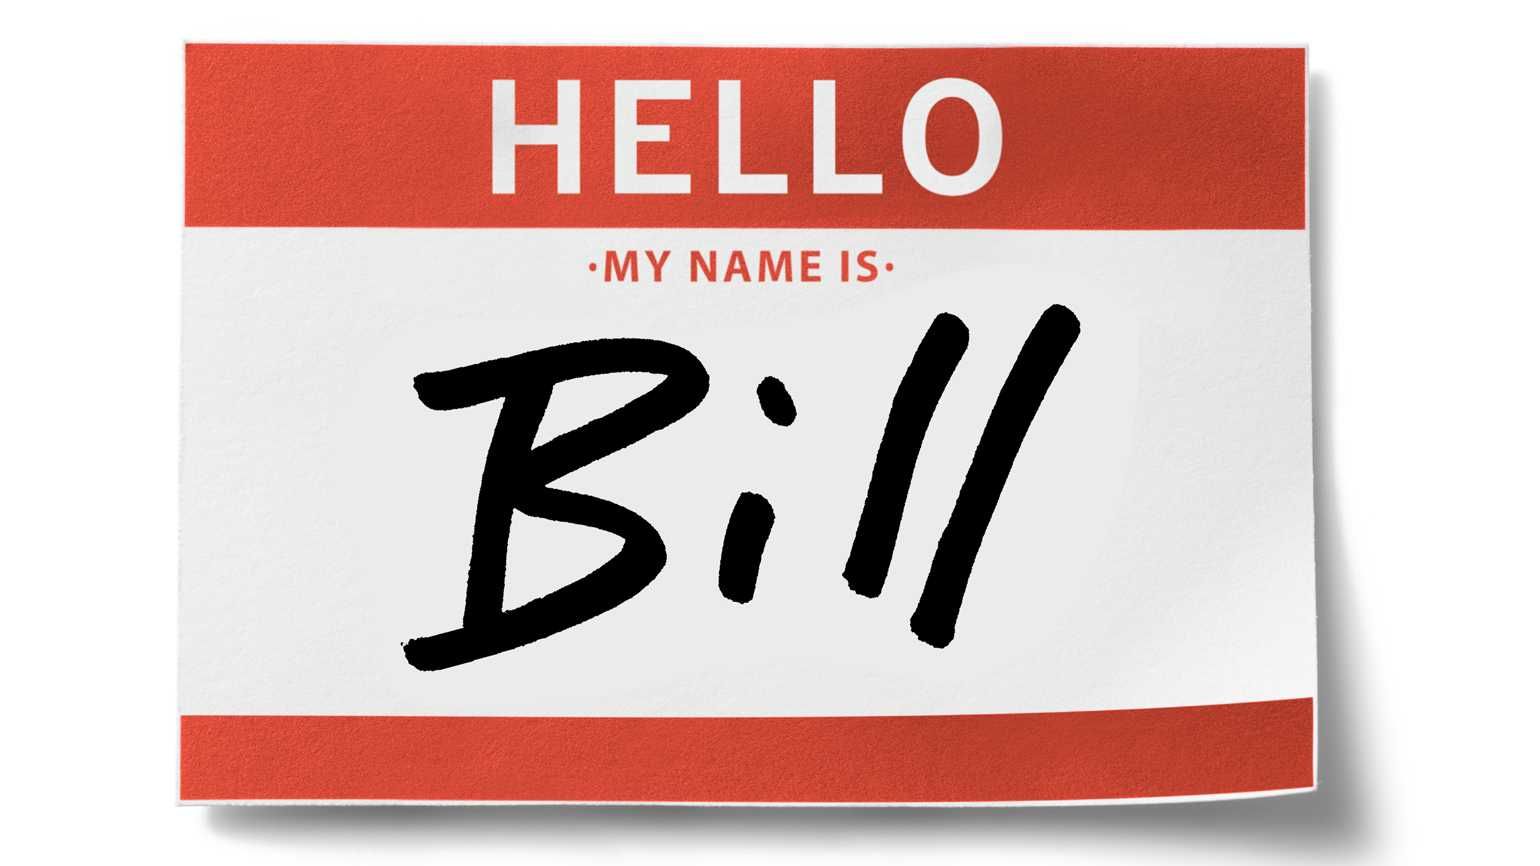 Illustration of a nametag that reads "hello my name is bill" from a true love story